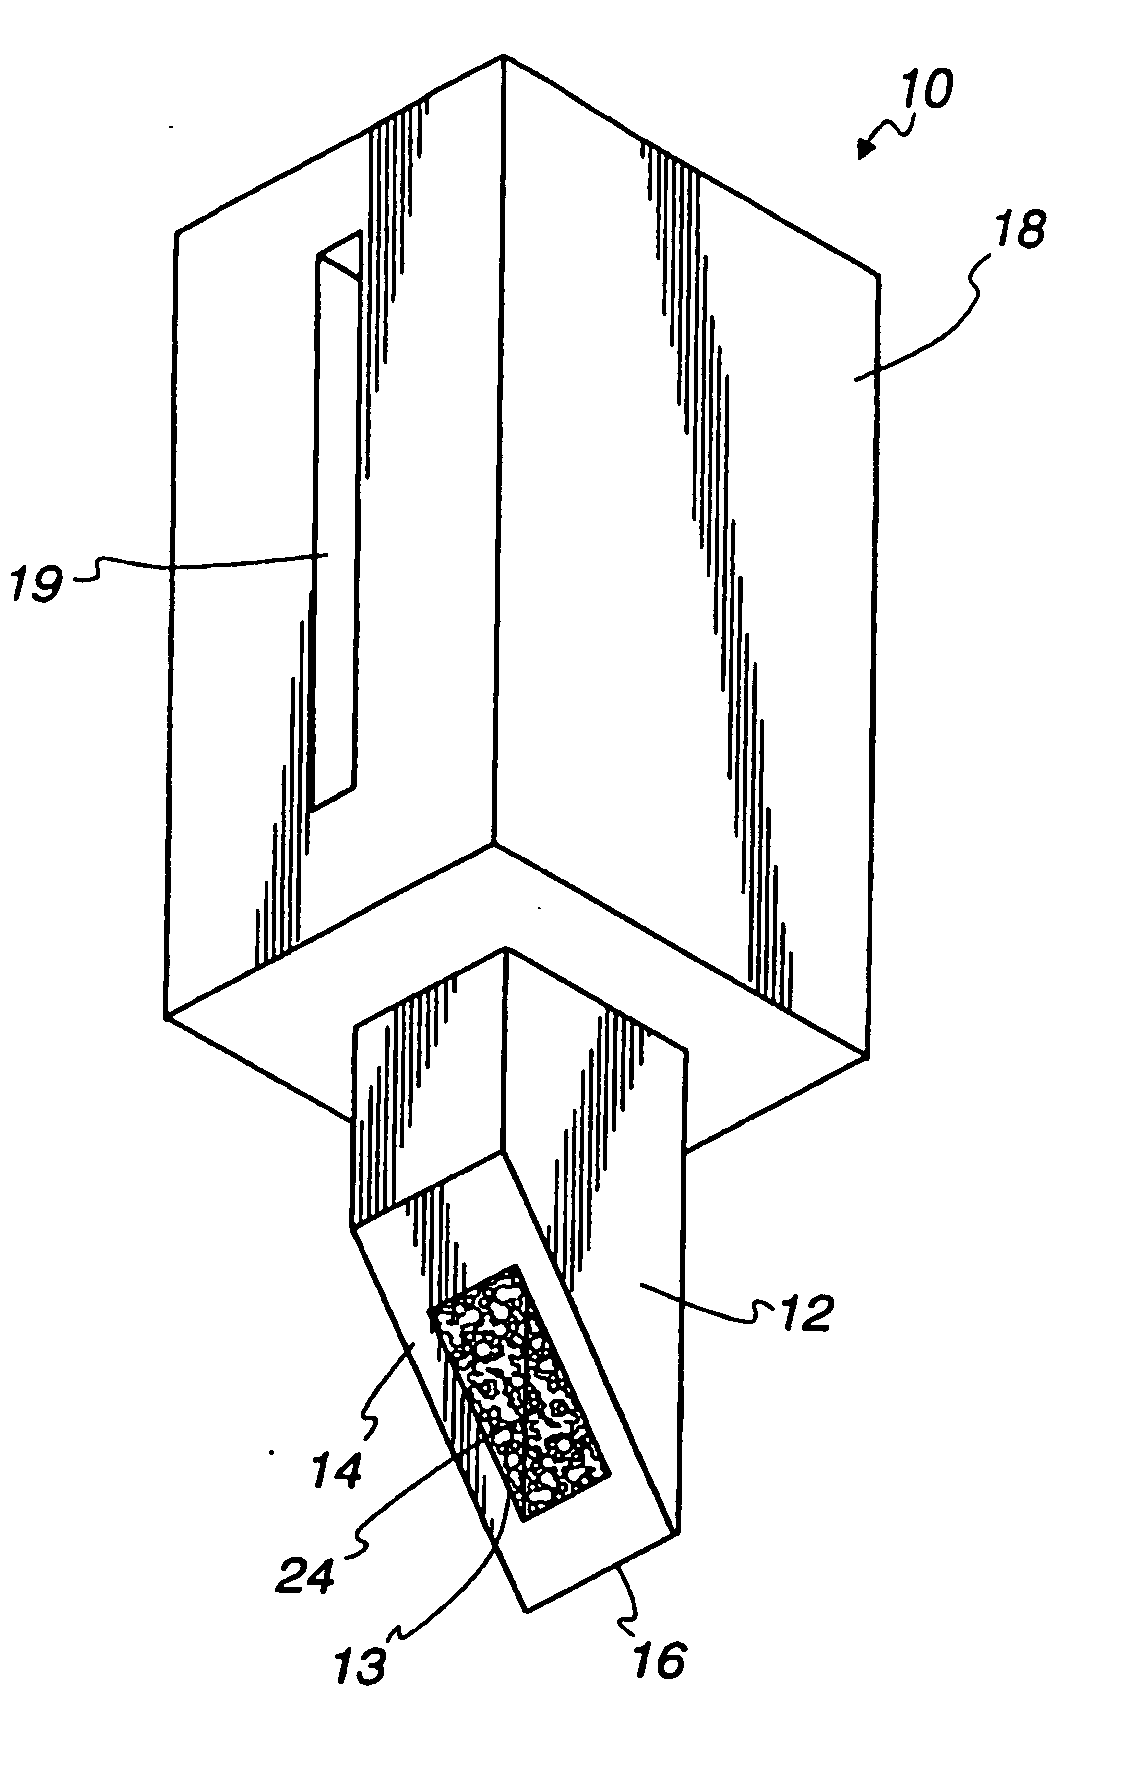 Minimum invasive optical format with integrated lance